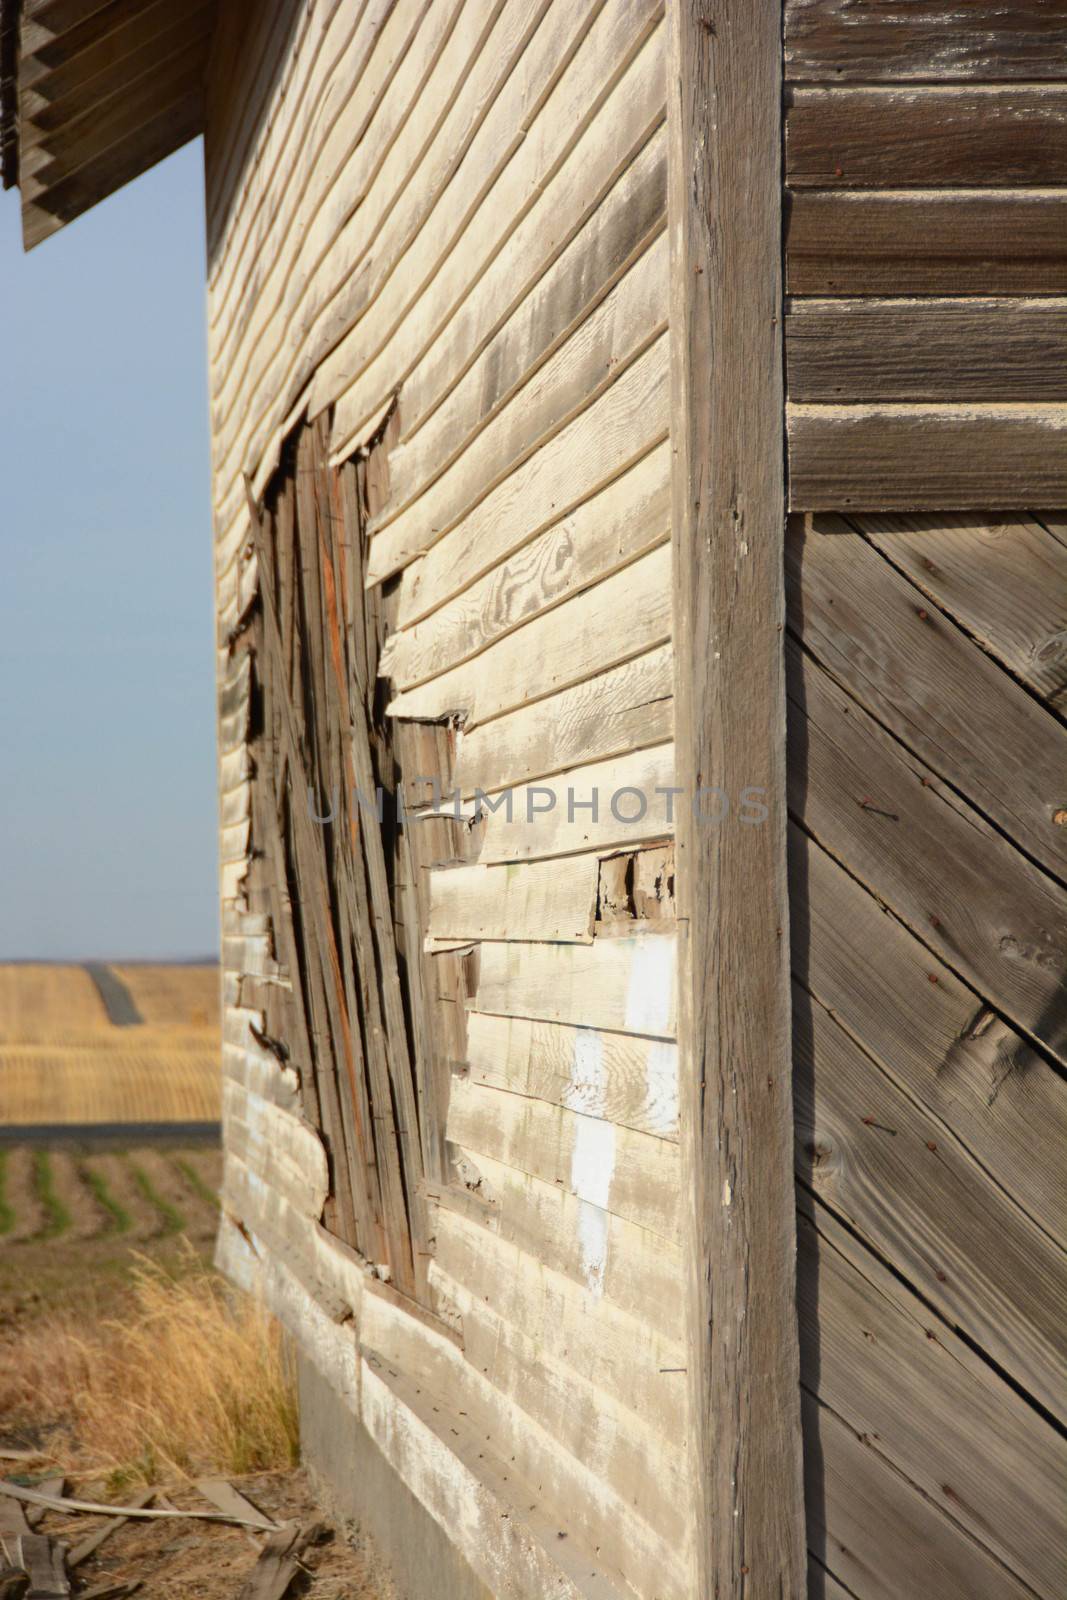 Weathered Schoolhouse in the Panhandle region of Idaho